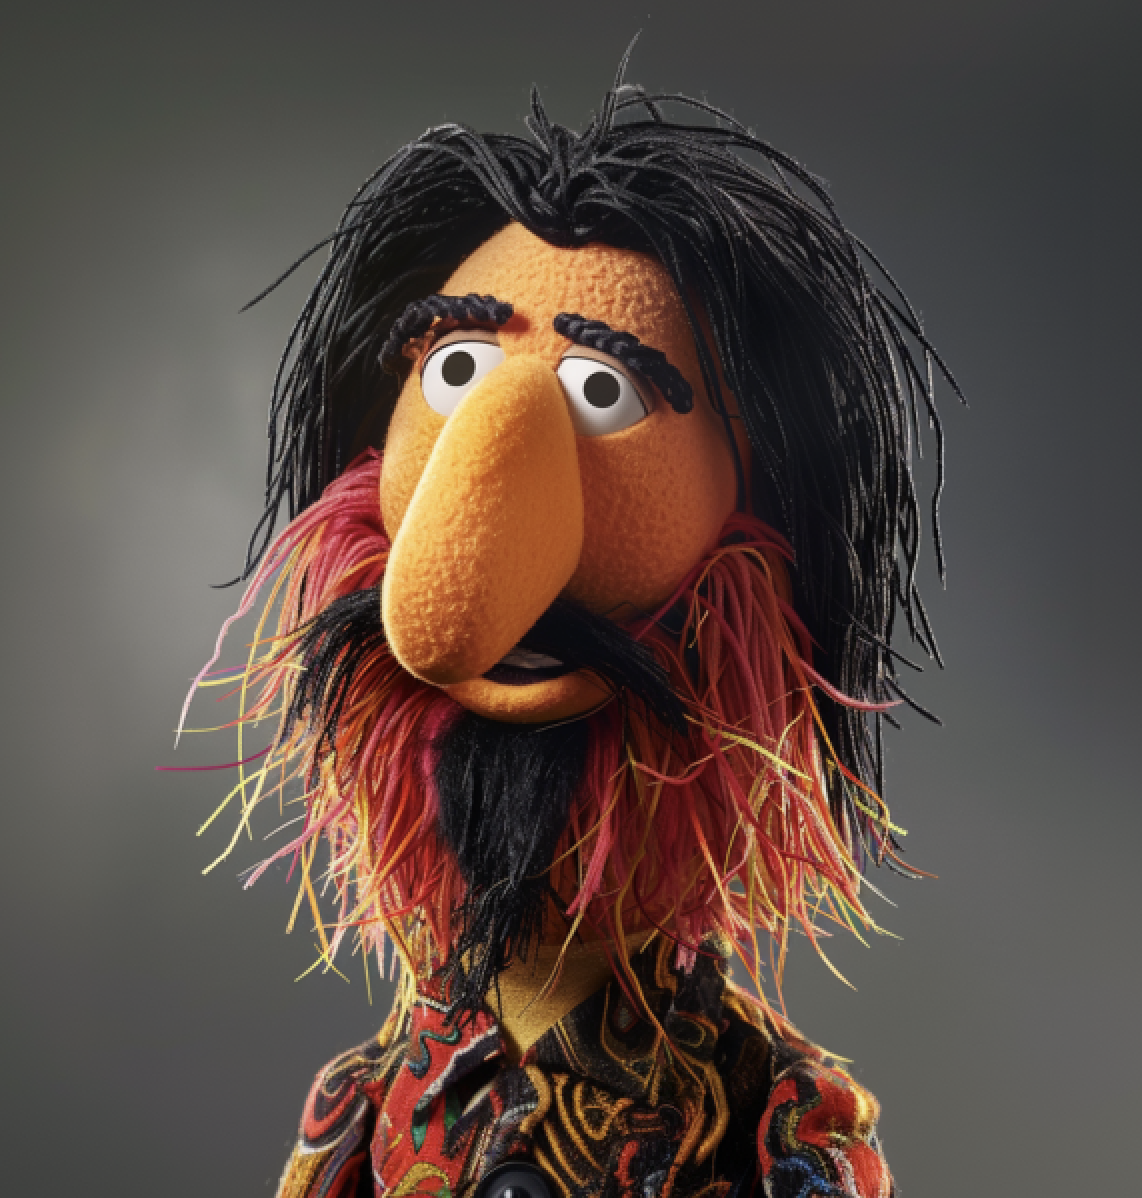 Muppet in a patterned shirt, with long dark hair, a multicolored beard, and a large nose